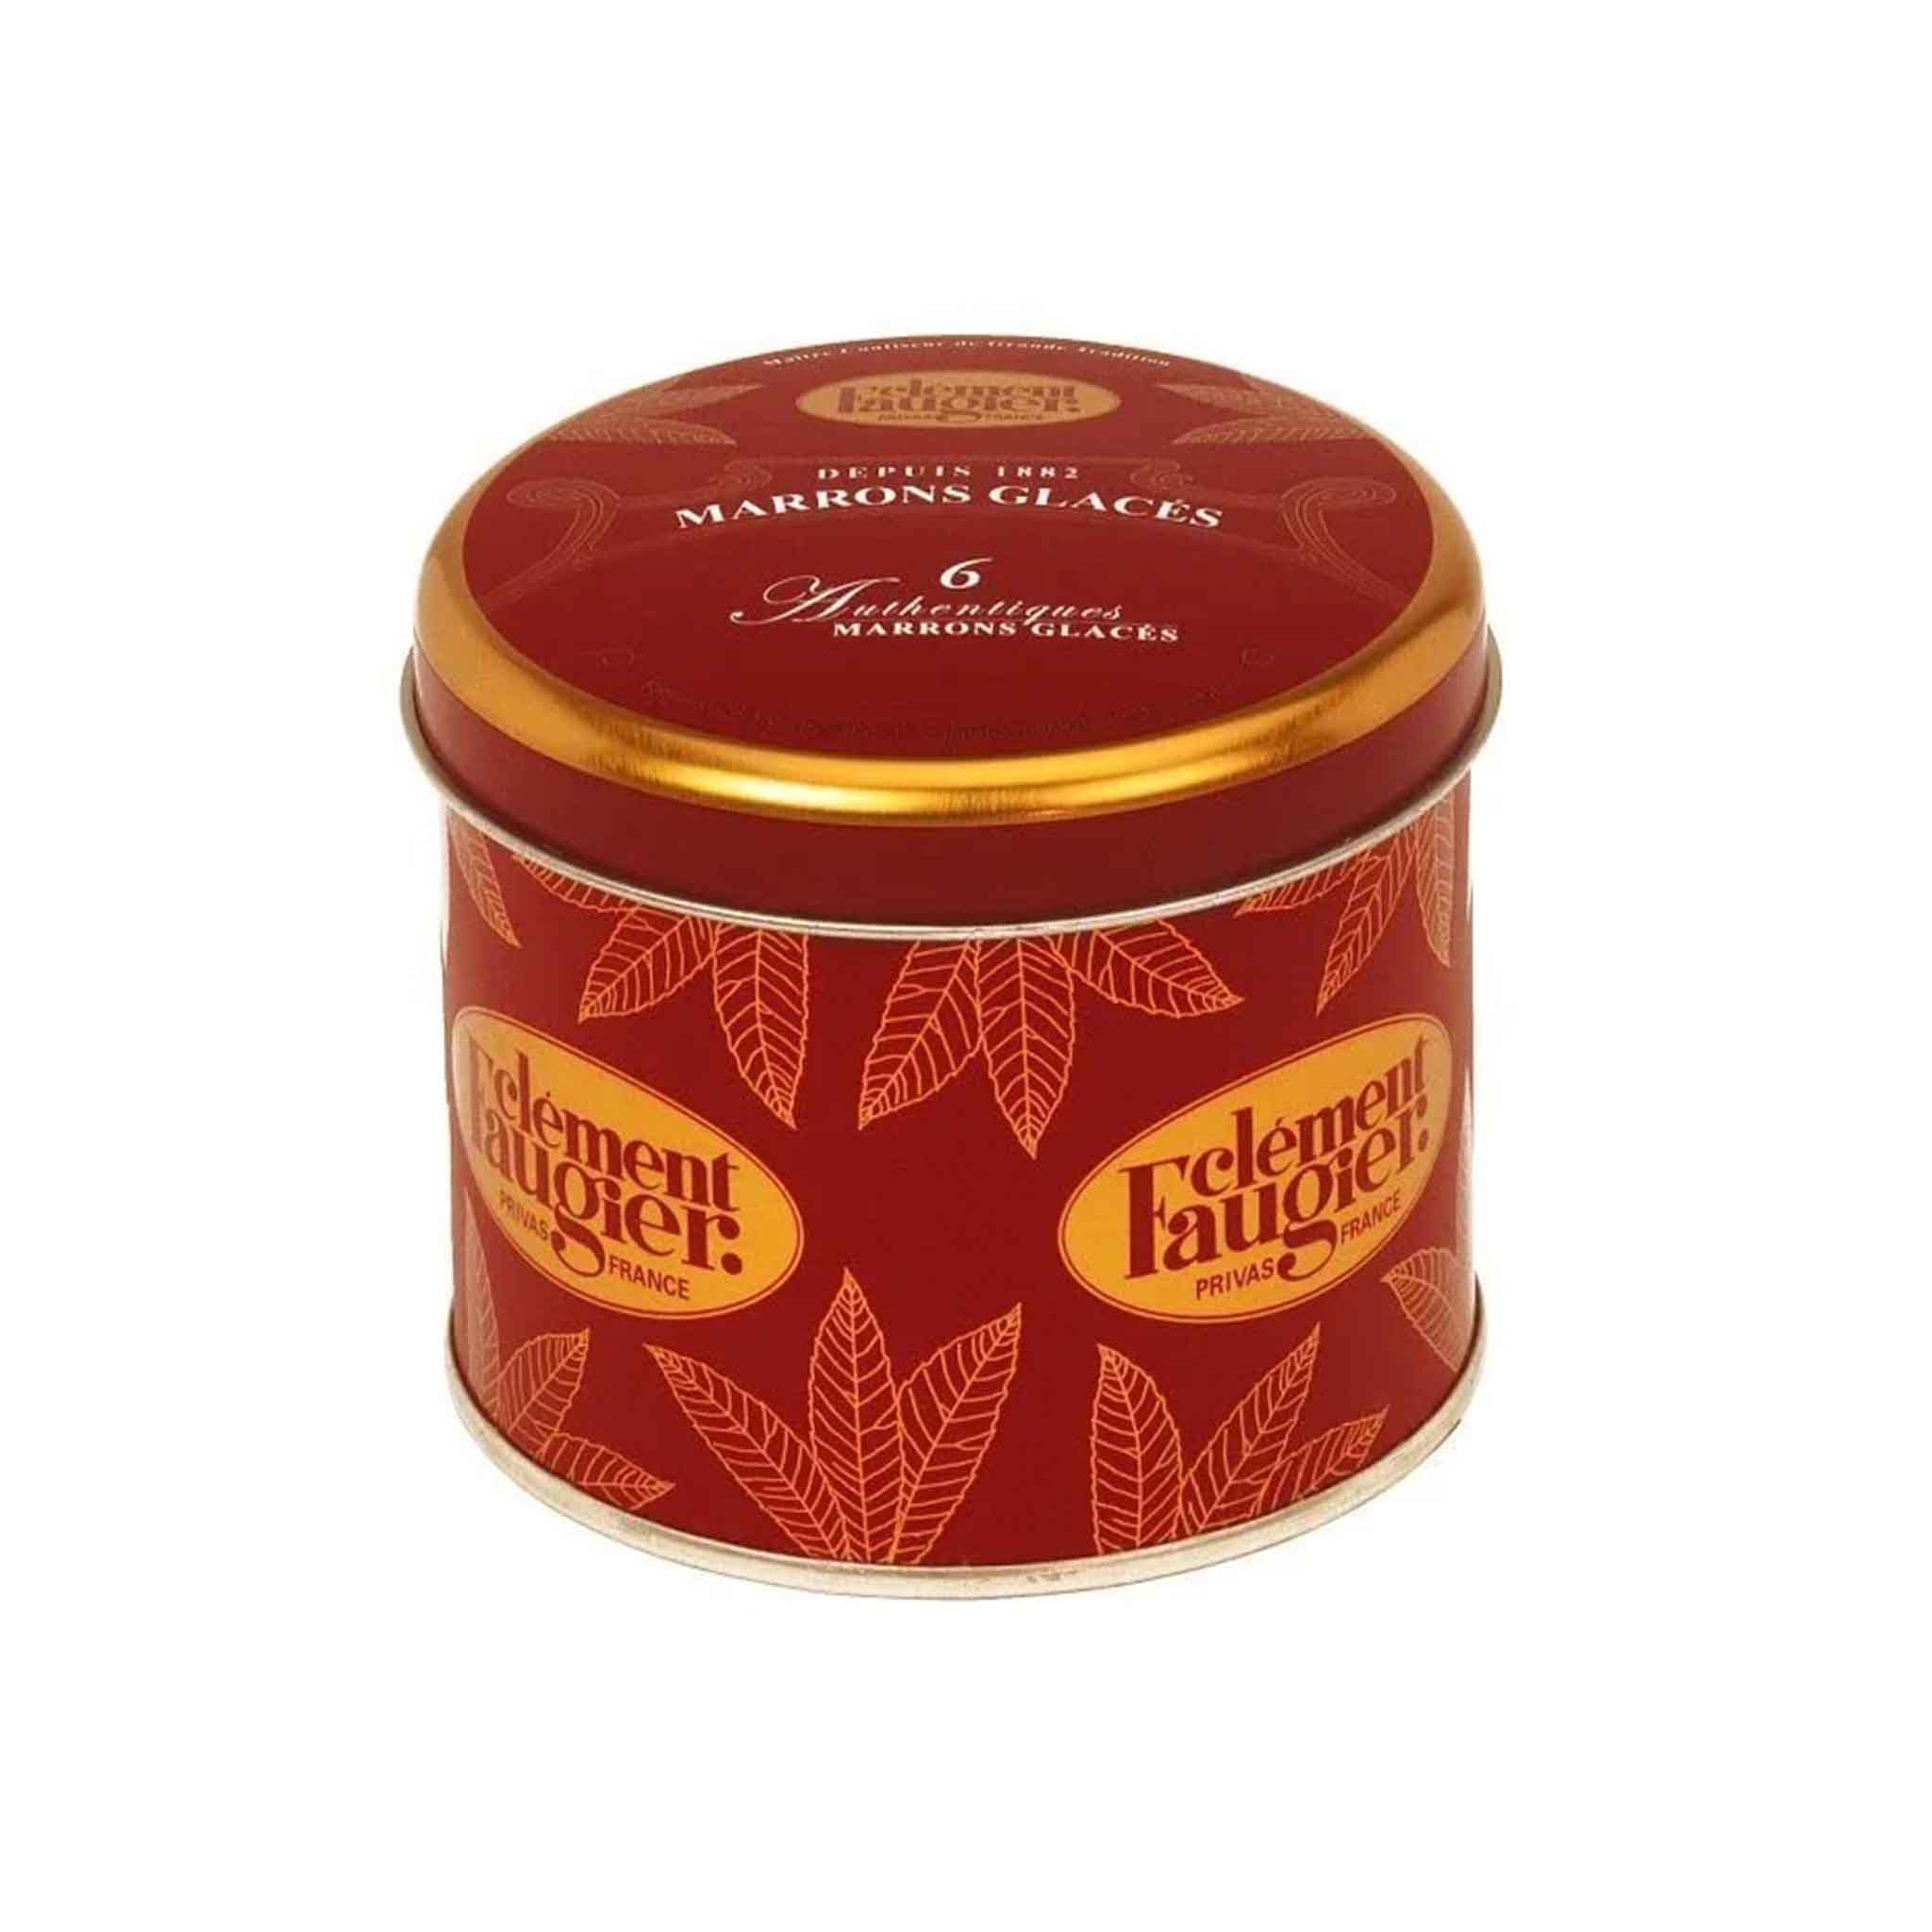 CLEMENT FAUGIER CANDIED CHESTNUTS 140g